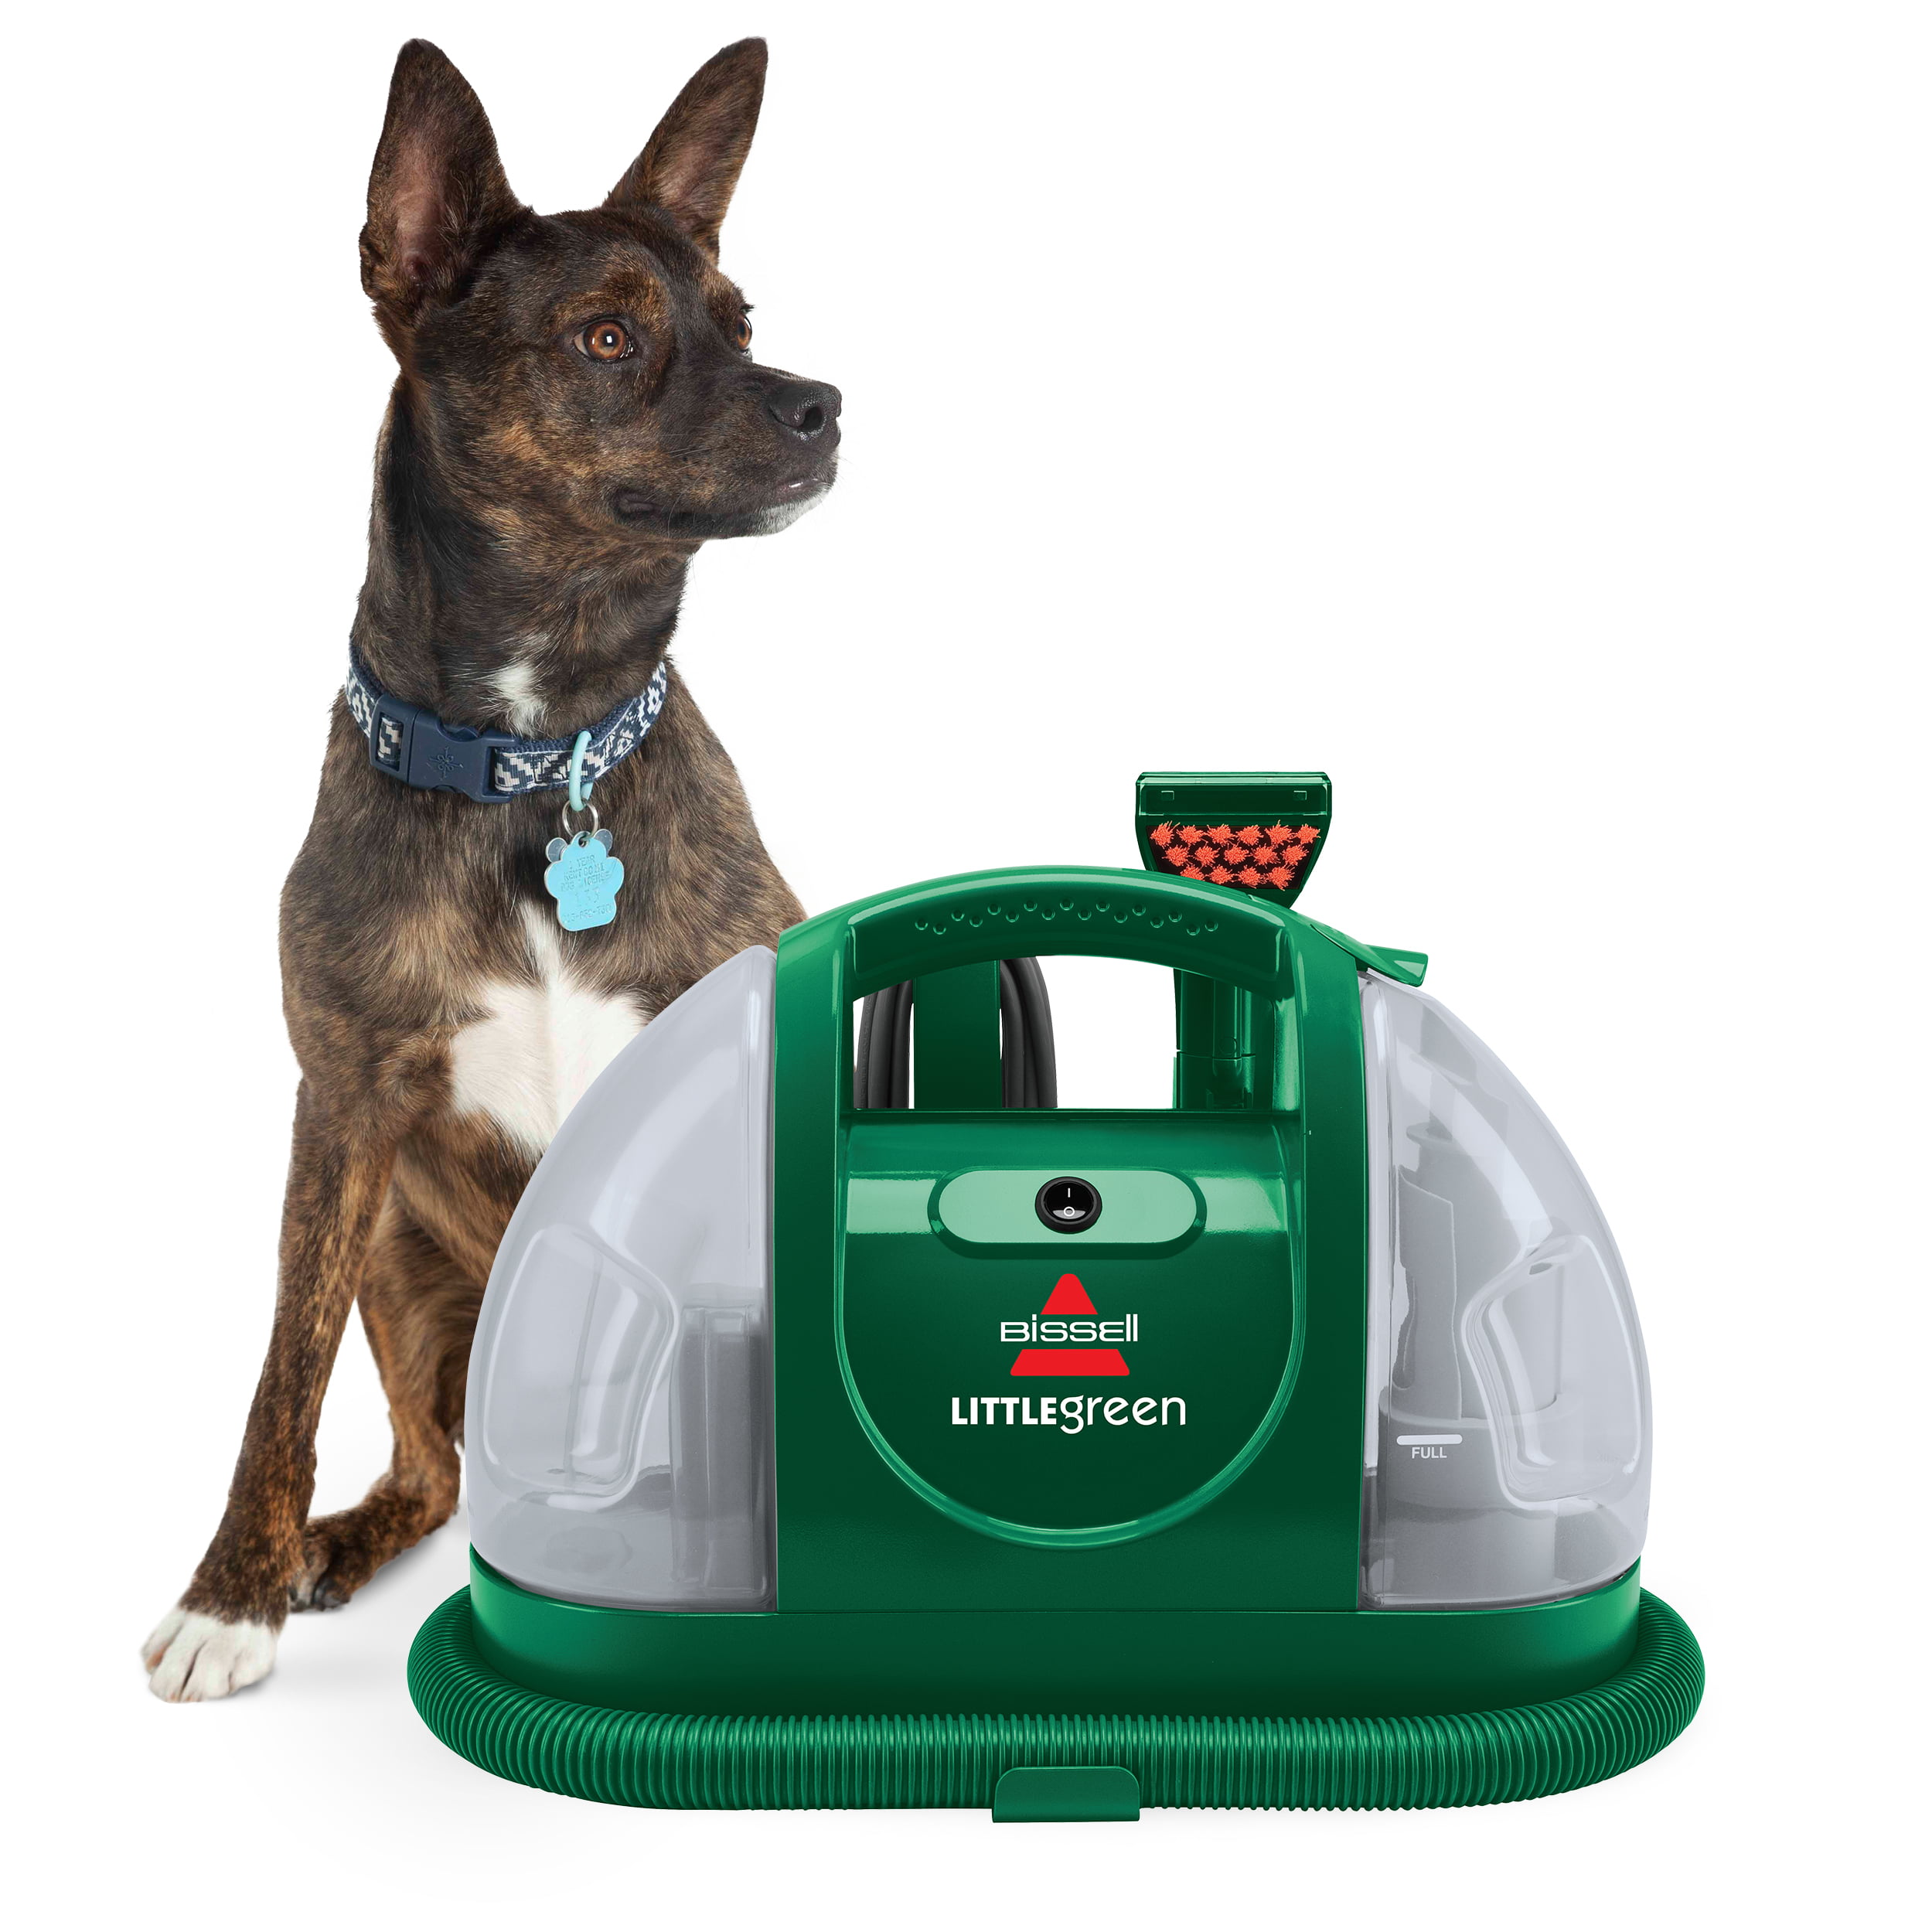 BISSELL Little Green Portable Spot and Stain Cleaner for $79 (Reg. $123.59) $78.92